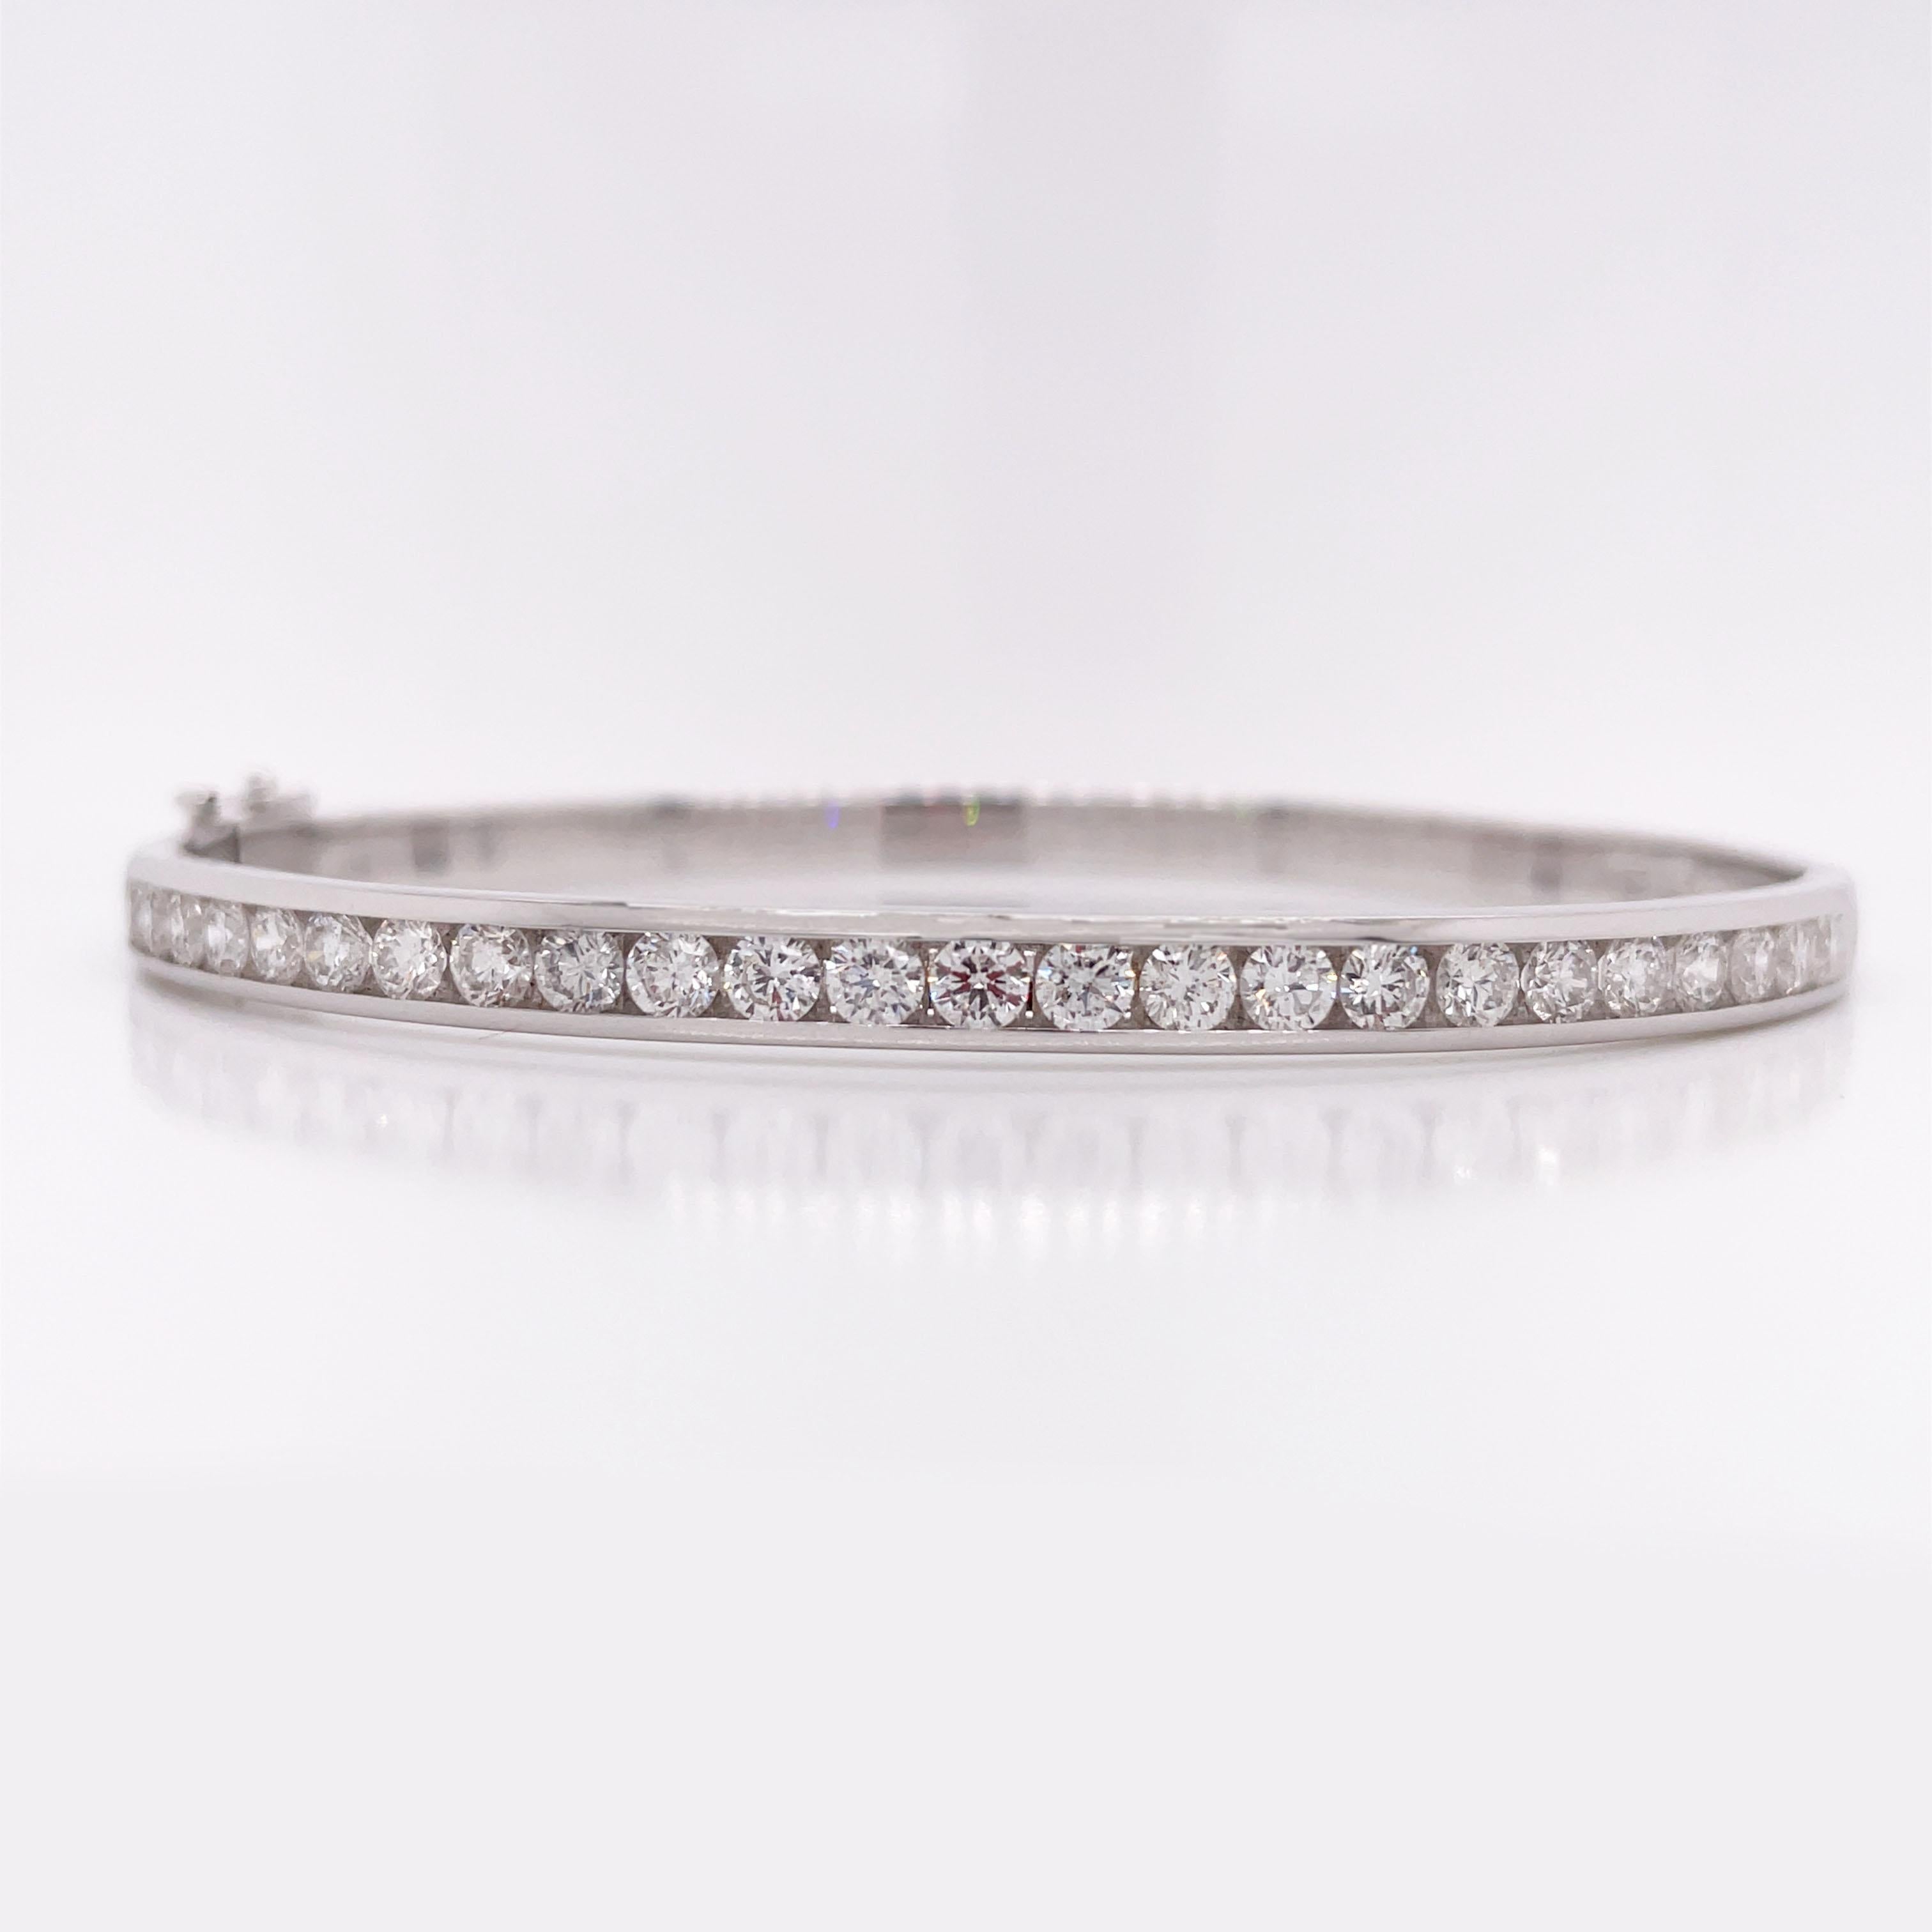 This beautiful bangle is made in 14k white gold and half of the bracelet is channel set with 25 total G/H color Si1 clarity  diamonds. The half diamond design prevents scratches and wear over time, making it perfect for everyday wear. Naturally,